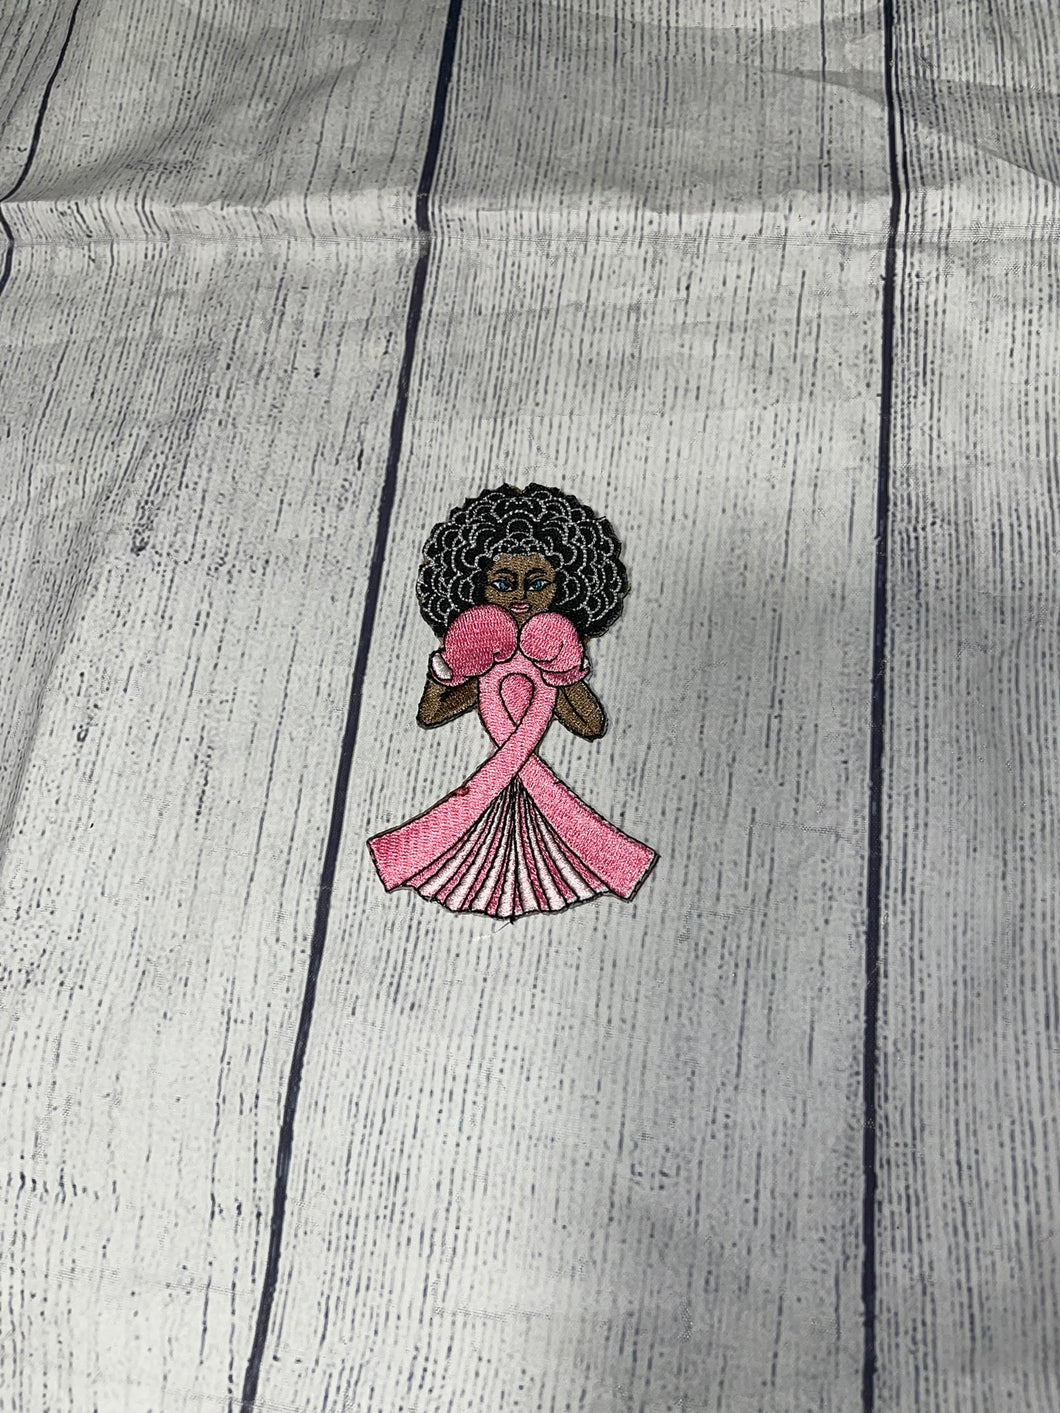 Cancer Ribbon Dress Iron on Patch